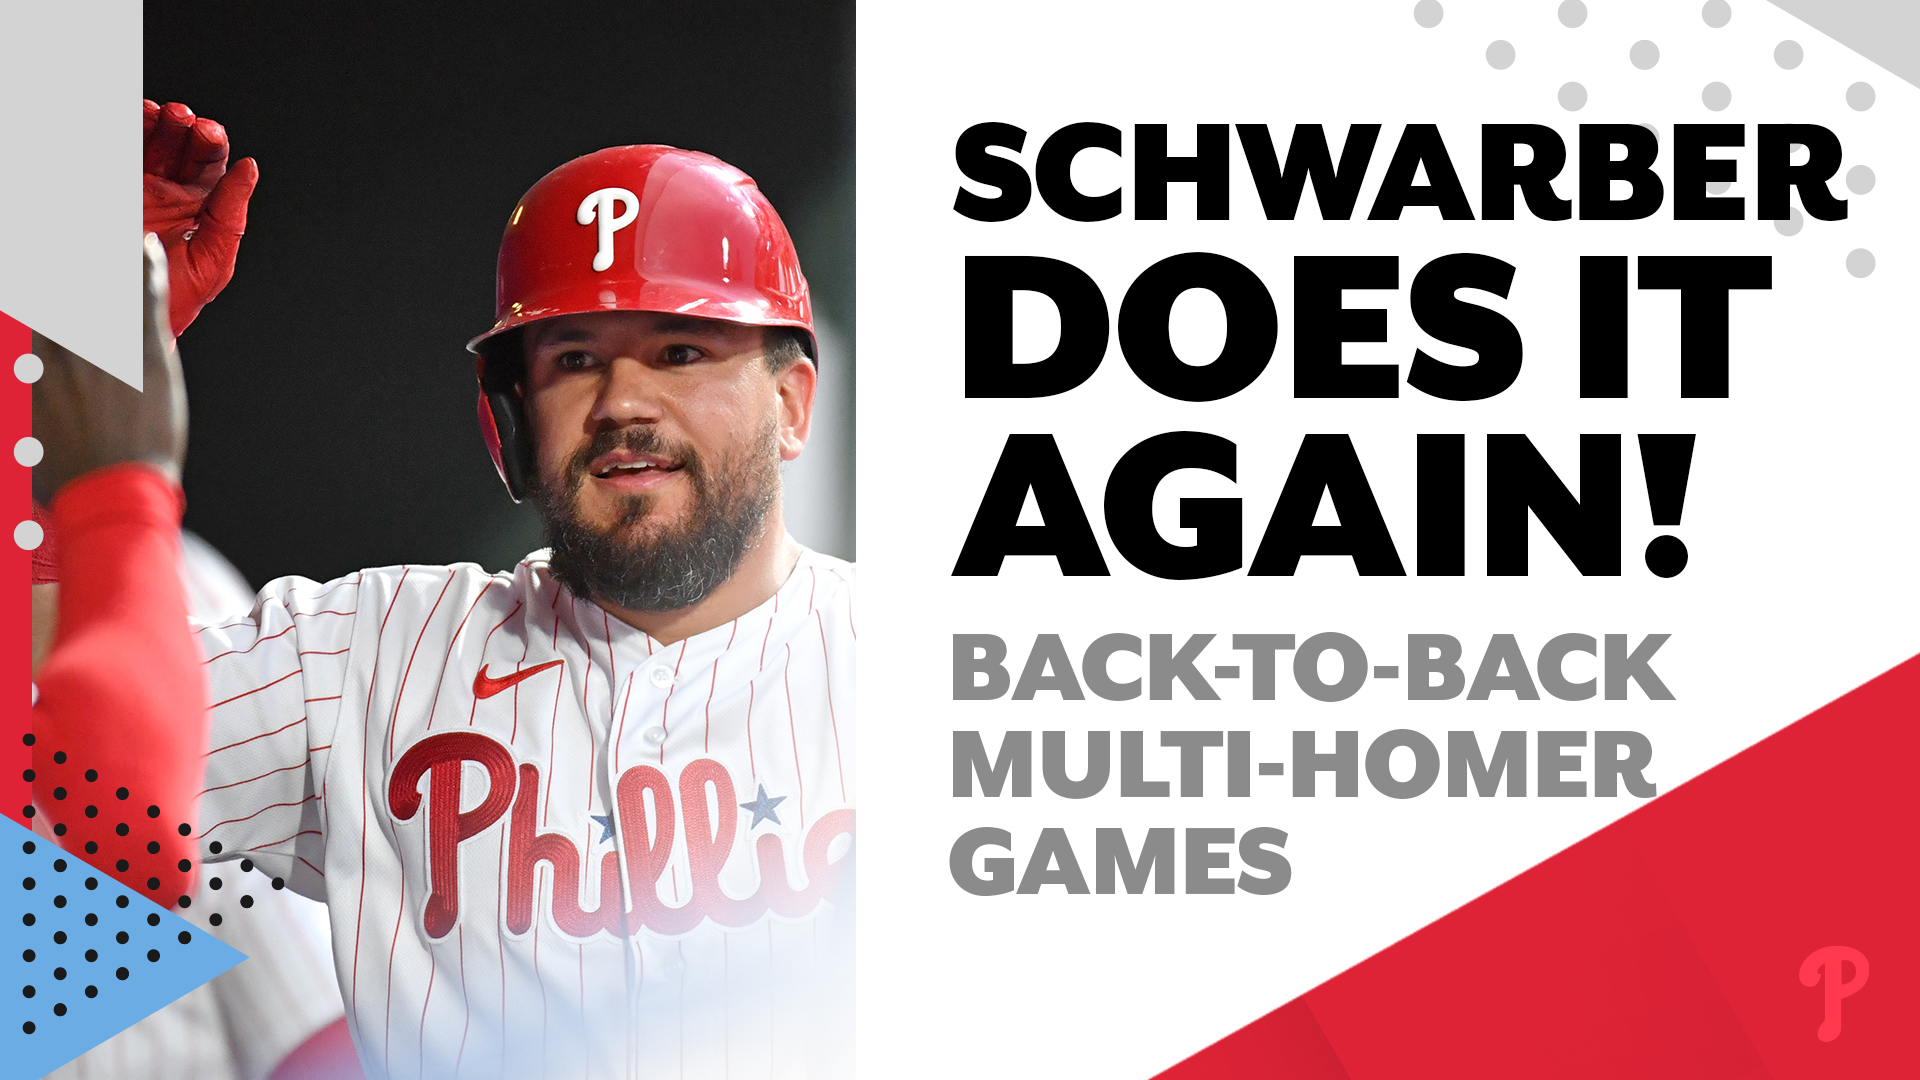 Kyle Schwarber makes it back to back games with a SchwarBOMB it is